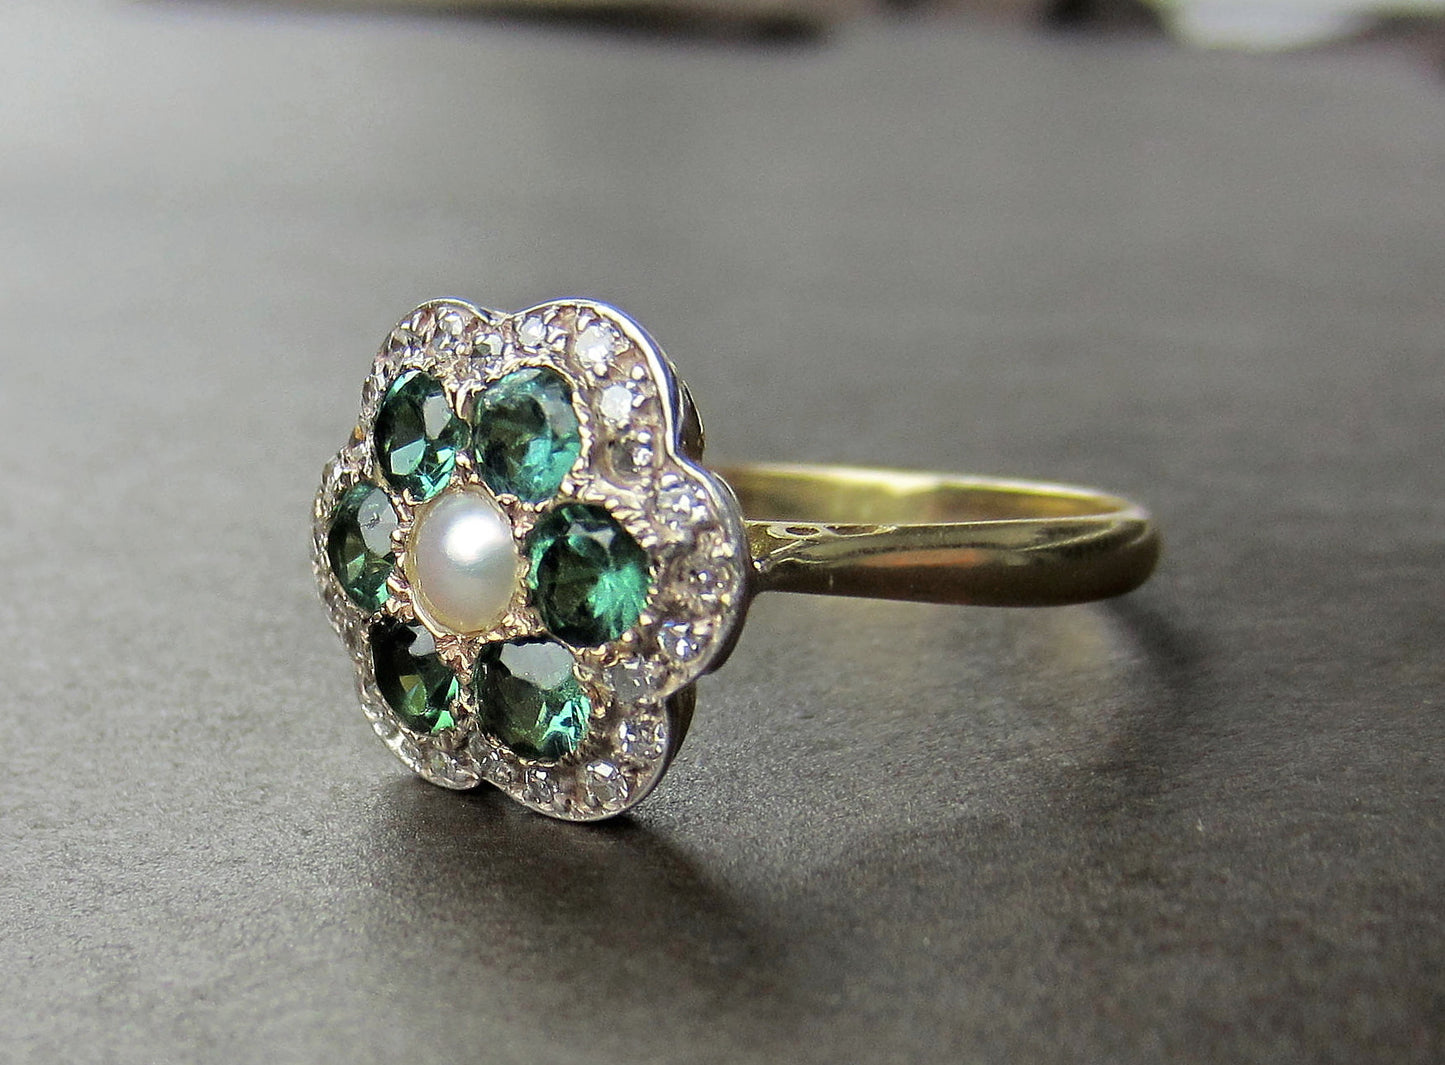 SOLD--Art Deco Tourmaline, Diamond and Pearl Flower Ring Silver/18k c. 1930